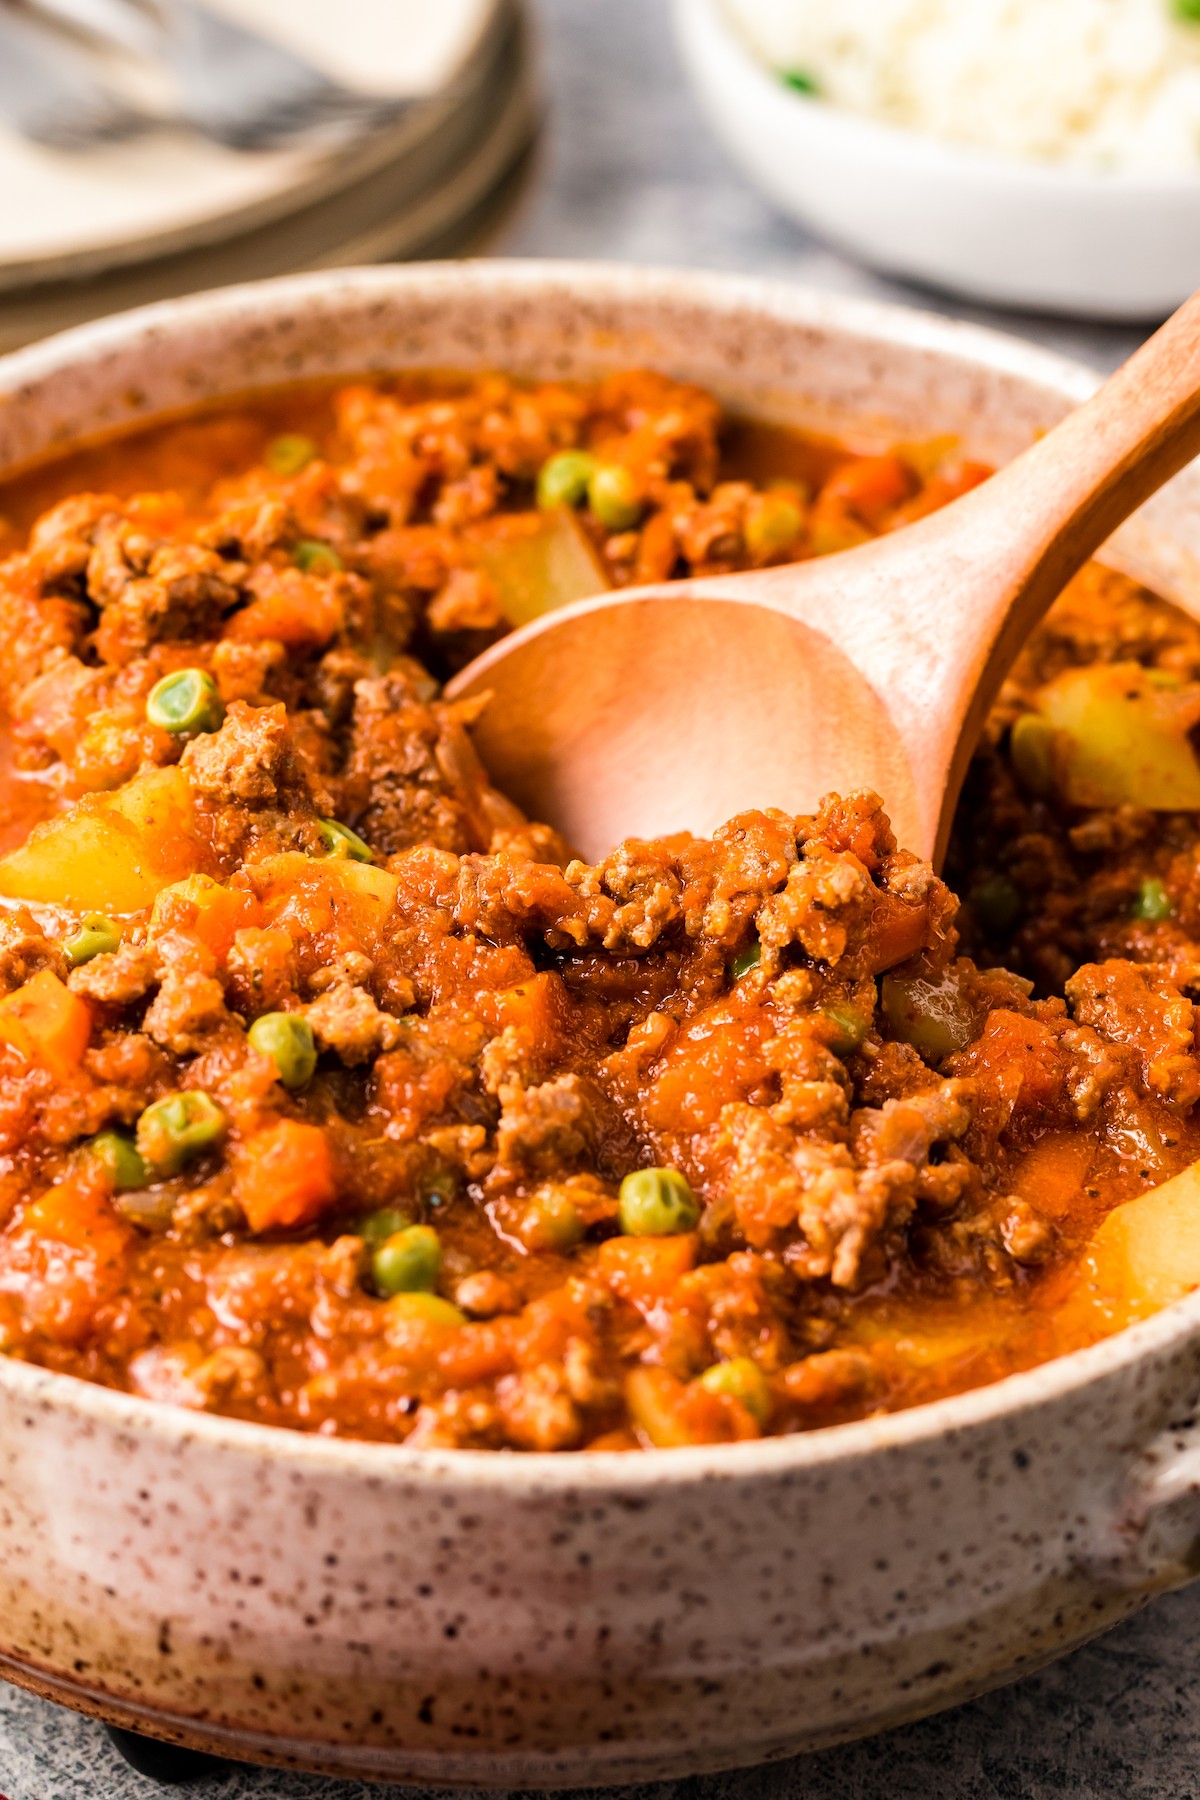 Picadillo in the pan.